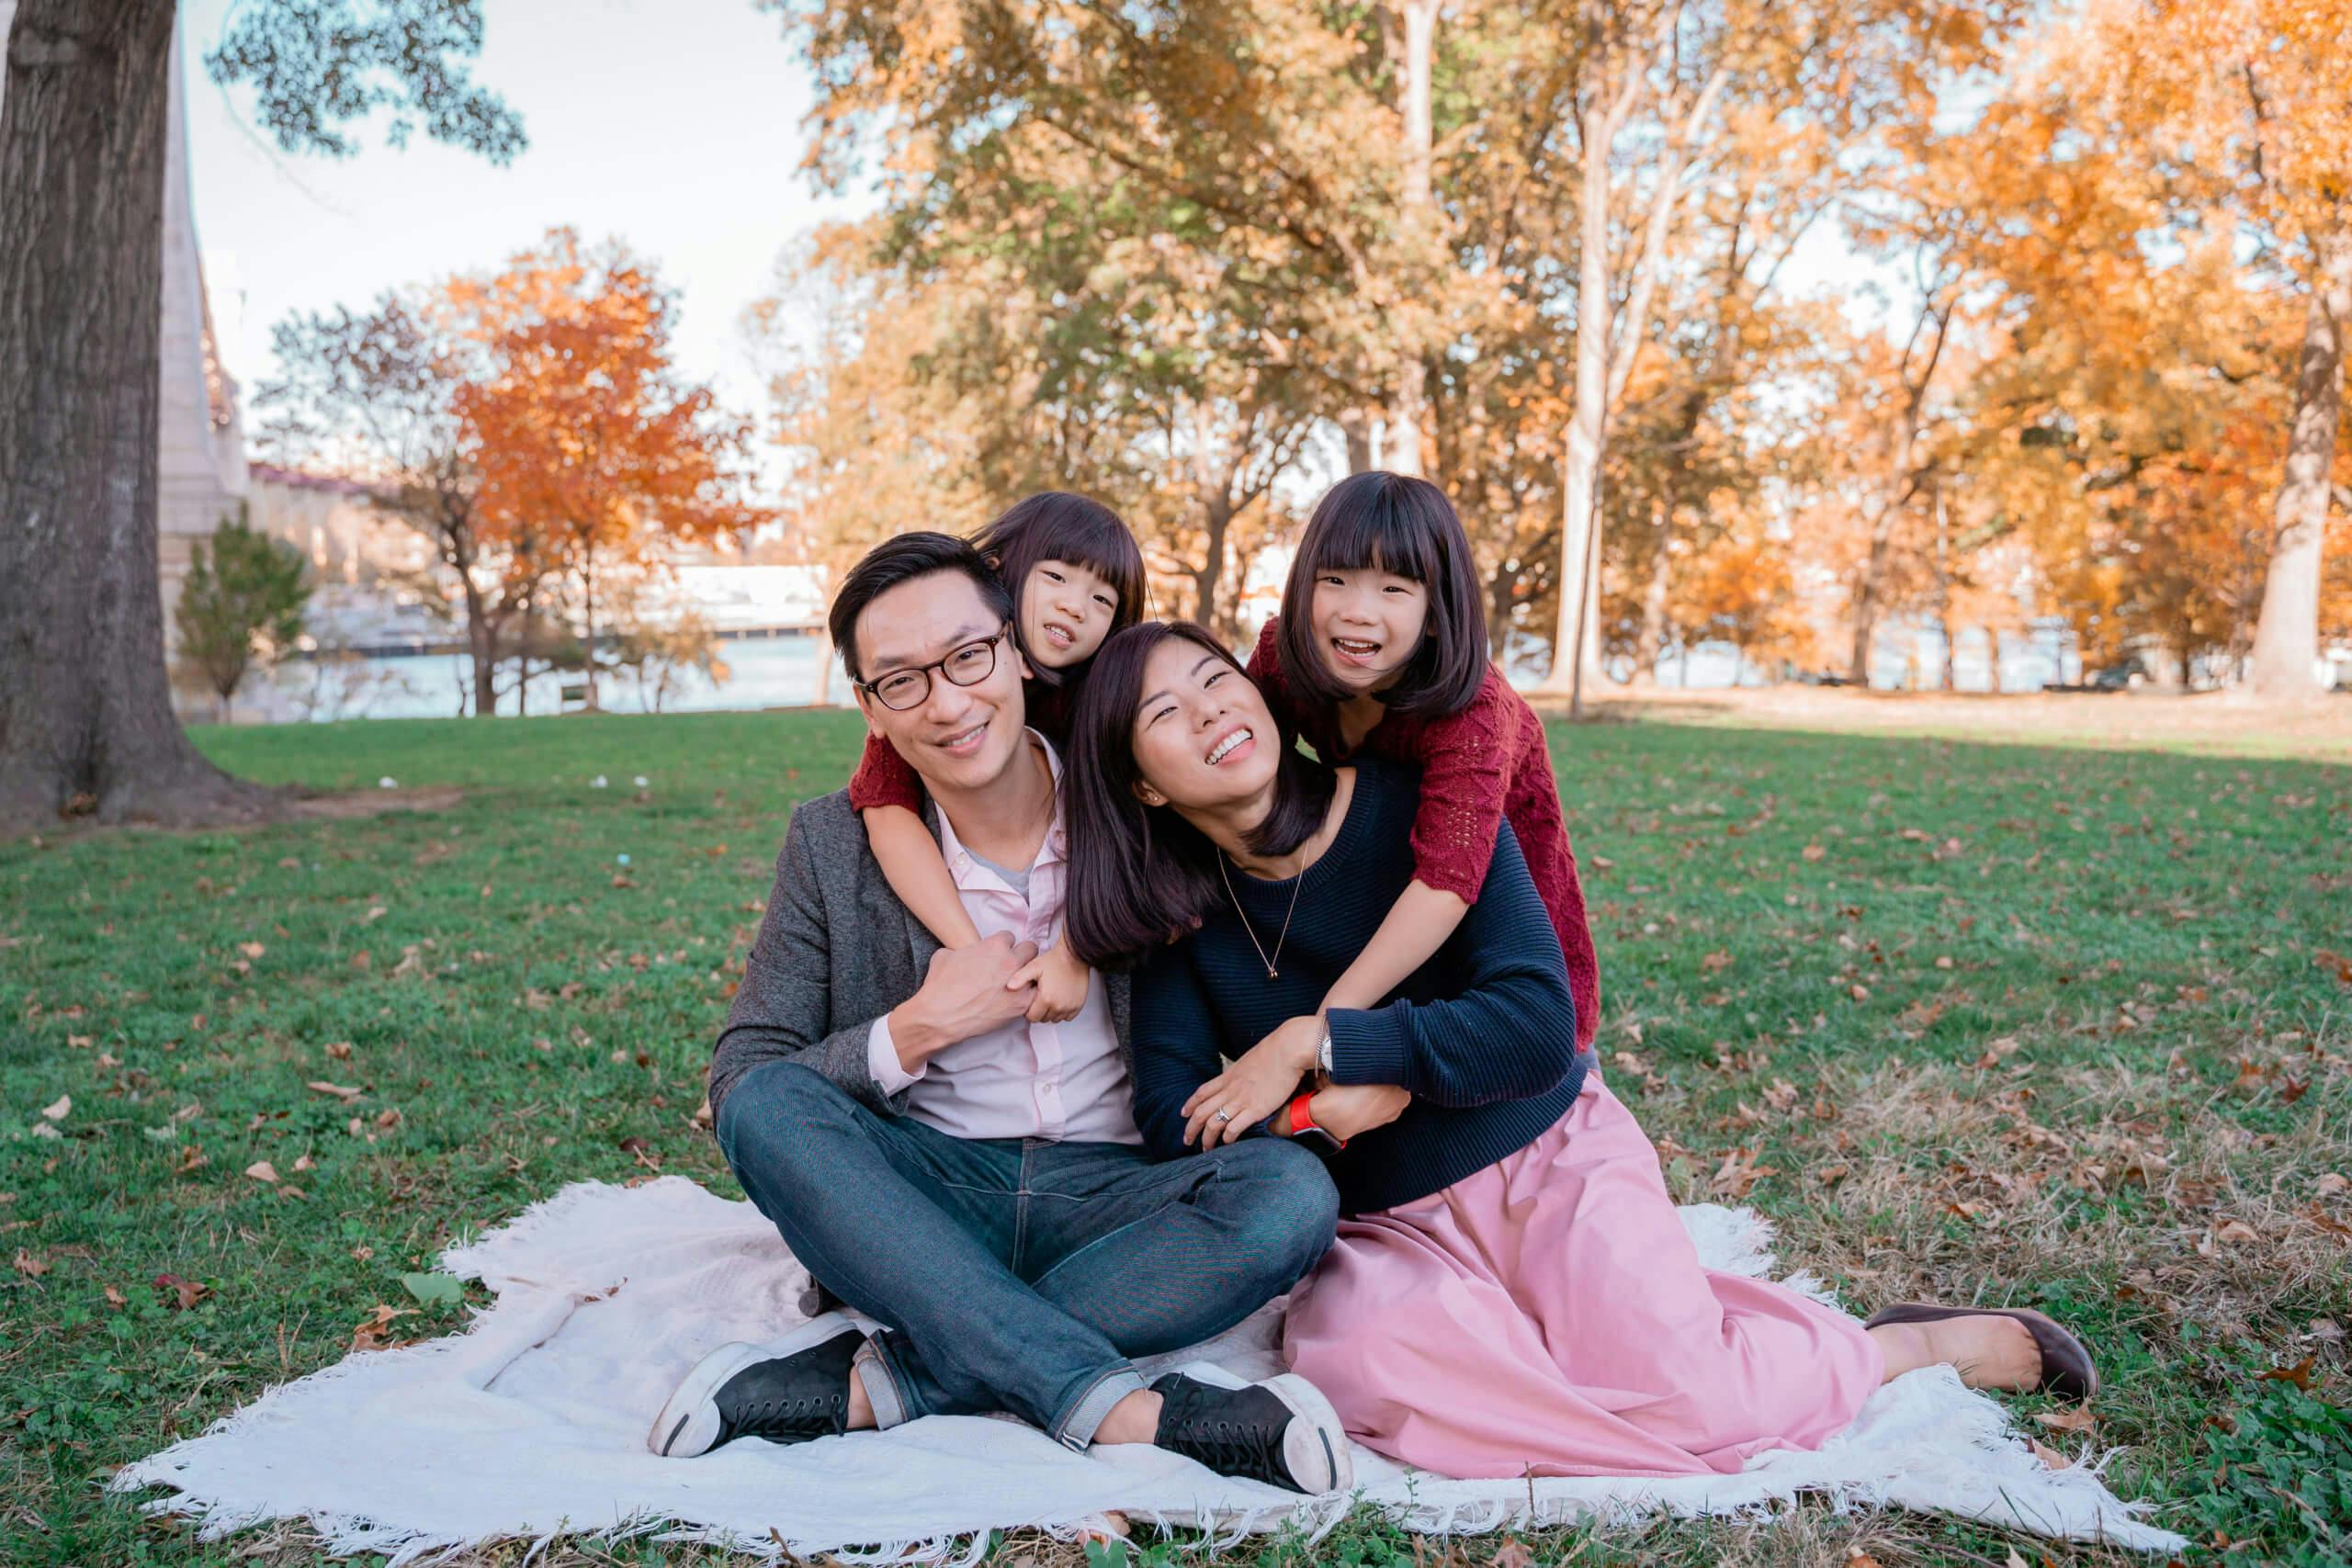 A family of four sitting on a blanket in a park with autumn leaves